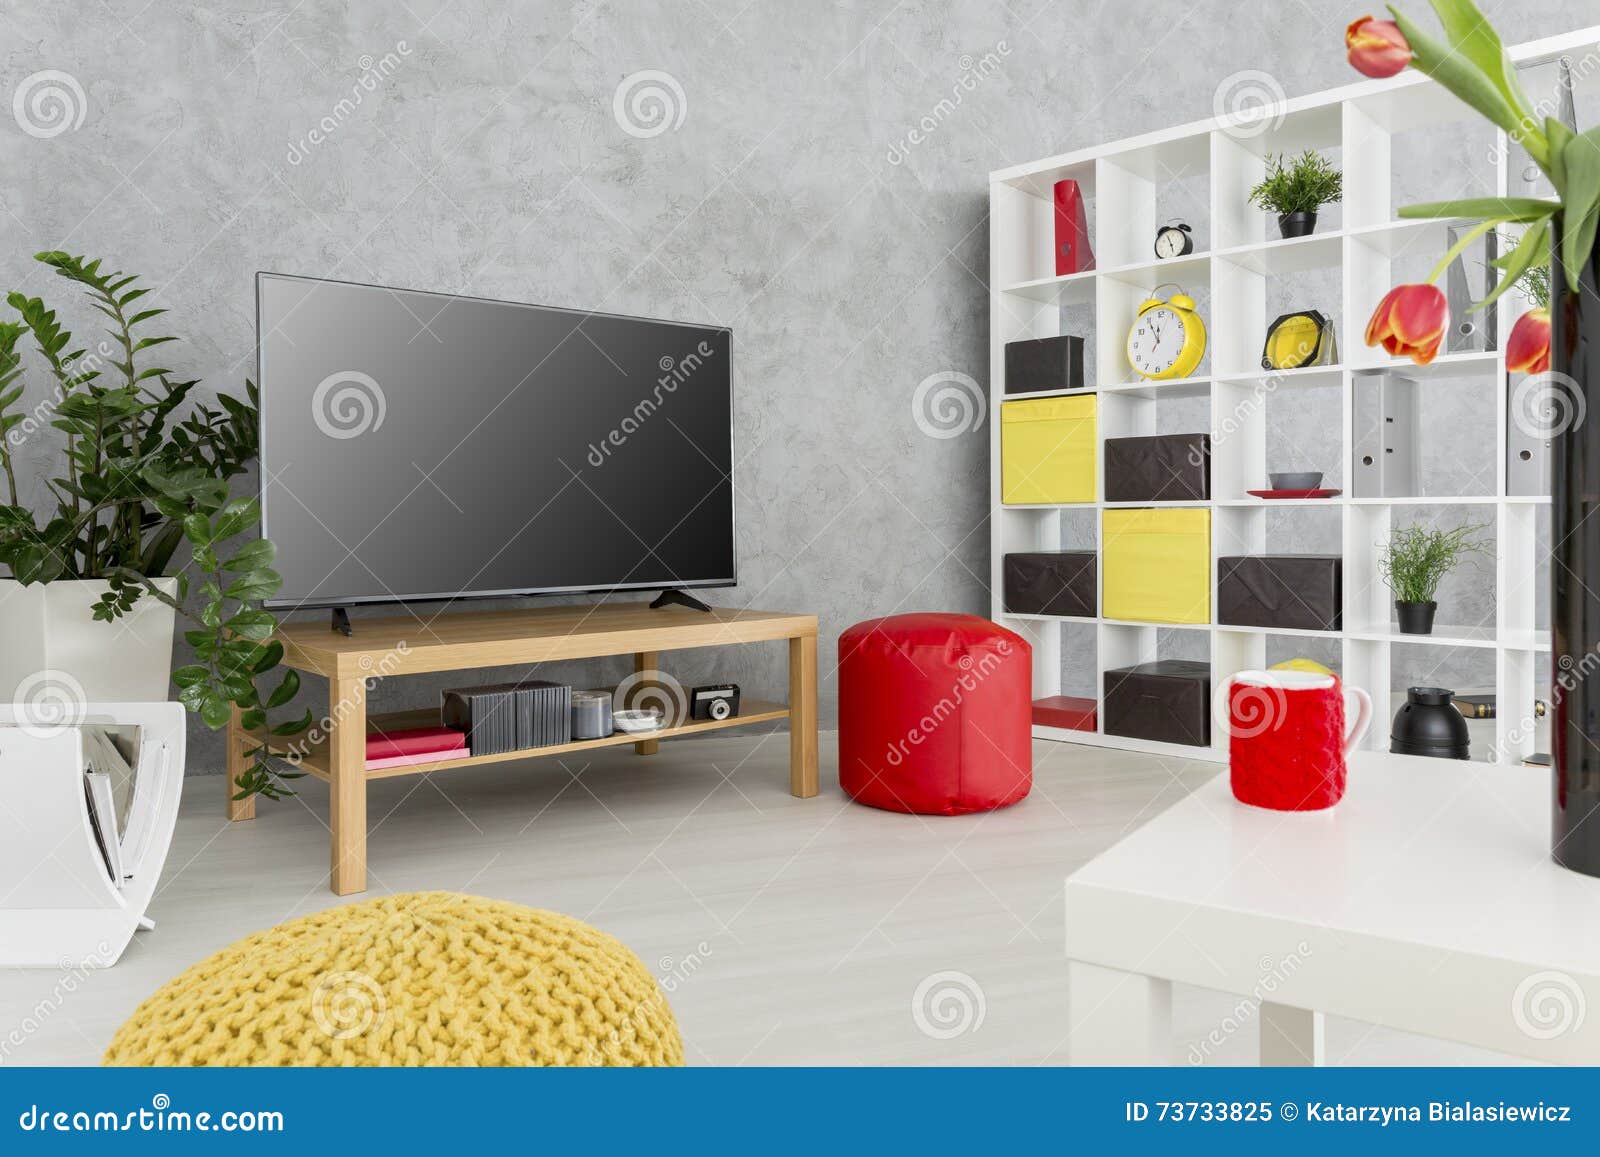 Practical Modern Decor For A Single Man Stock Image Image